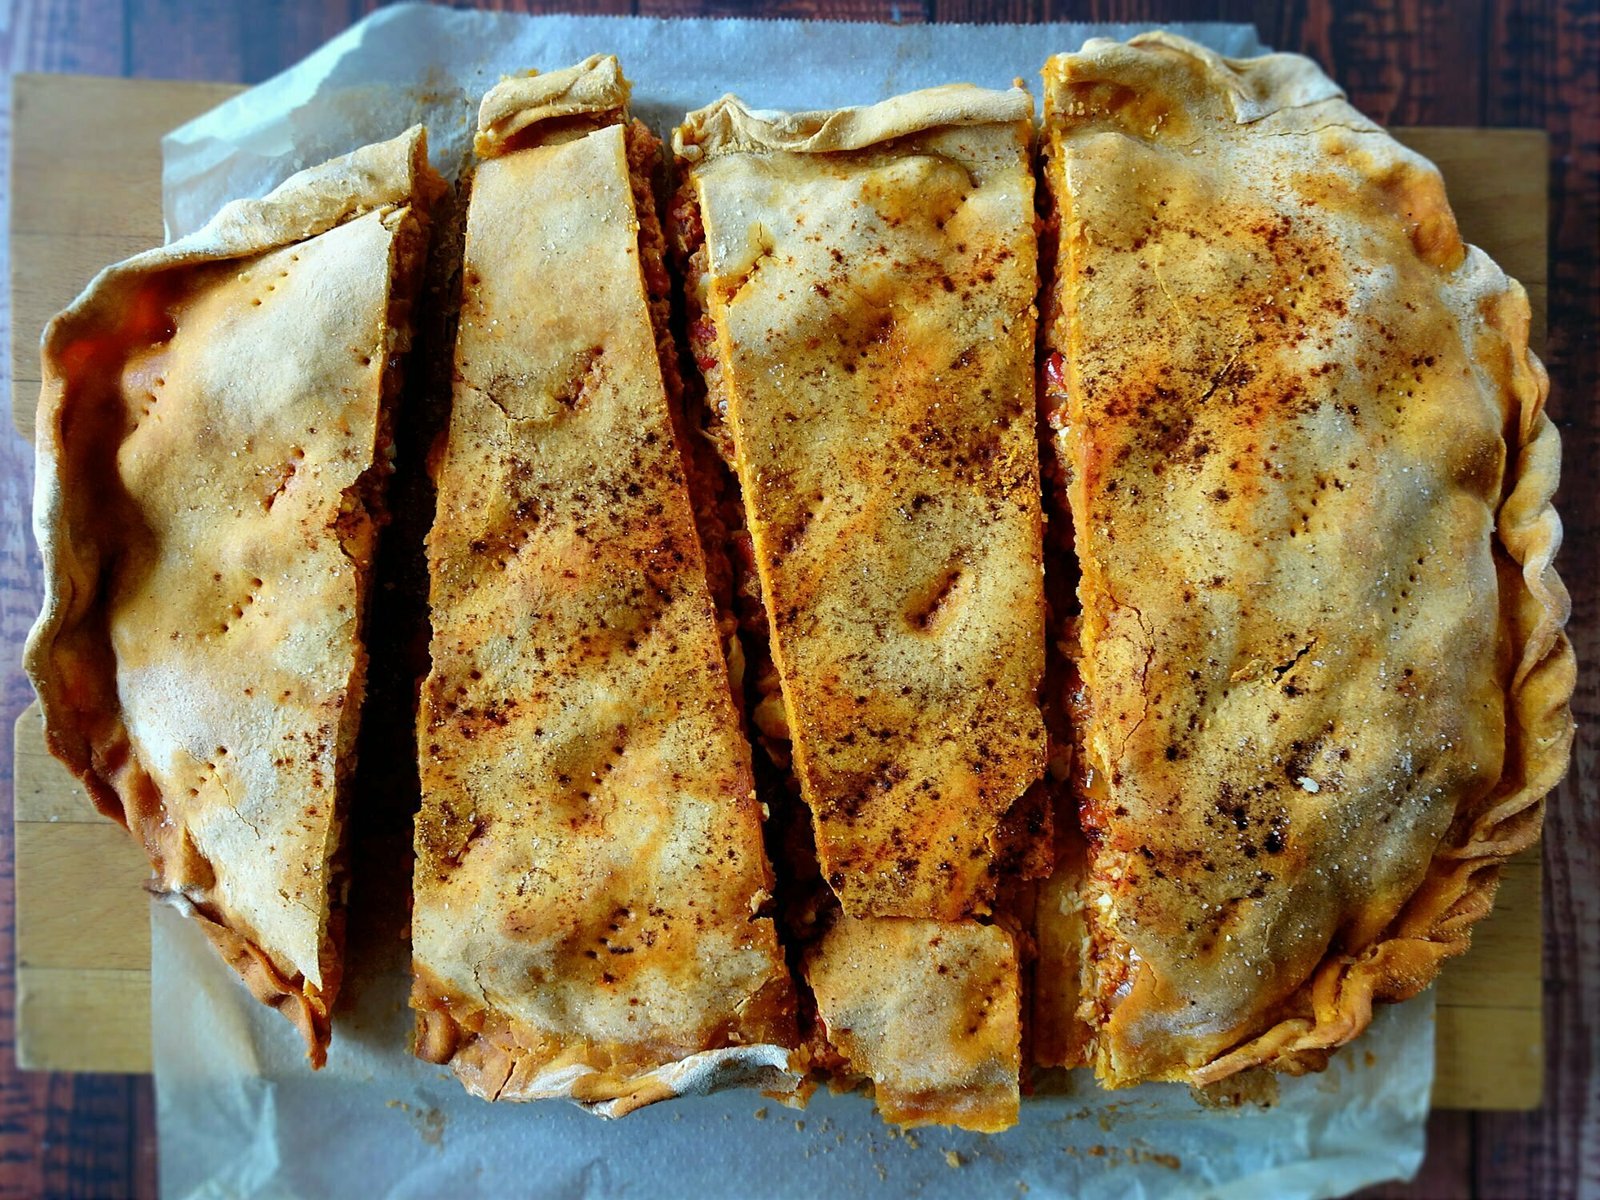 A large empanada gallega sits cut up into peices on some parchment paper